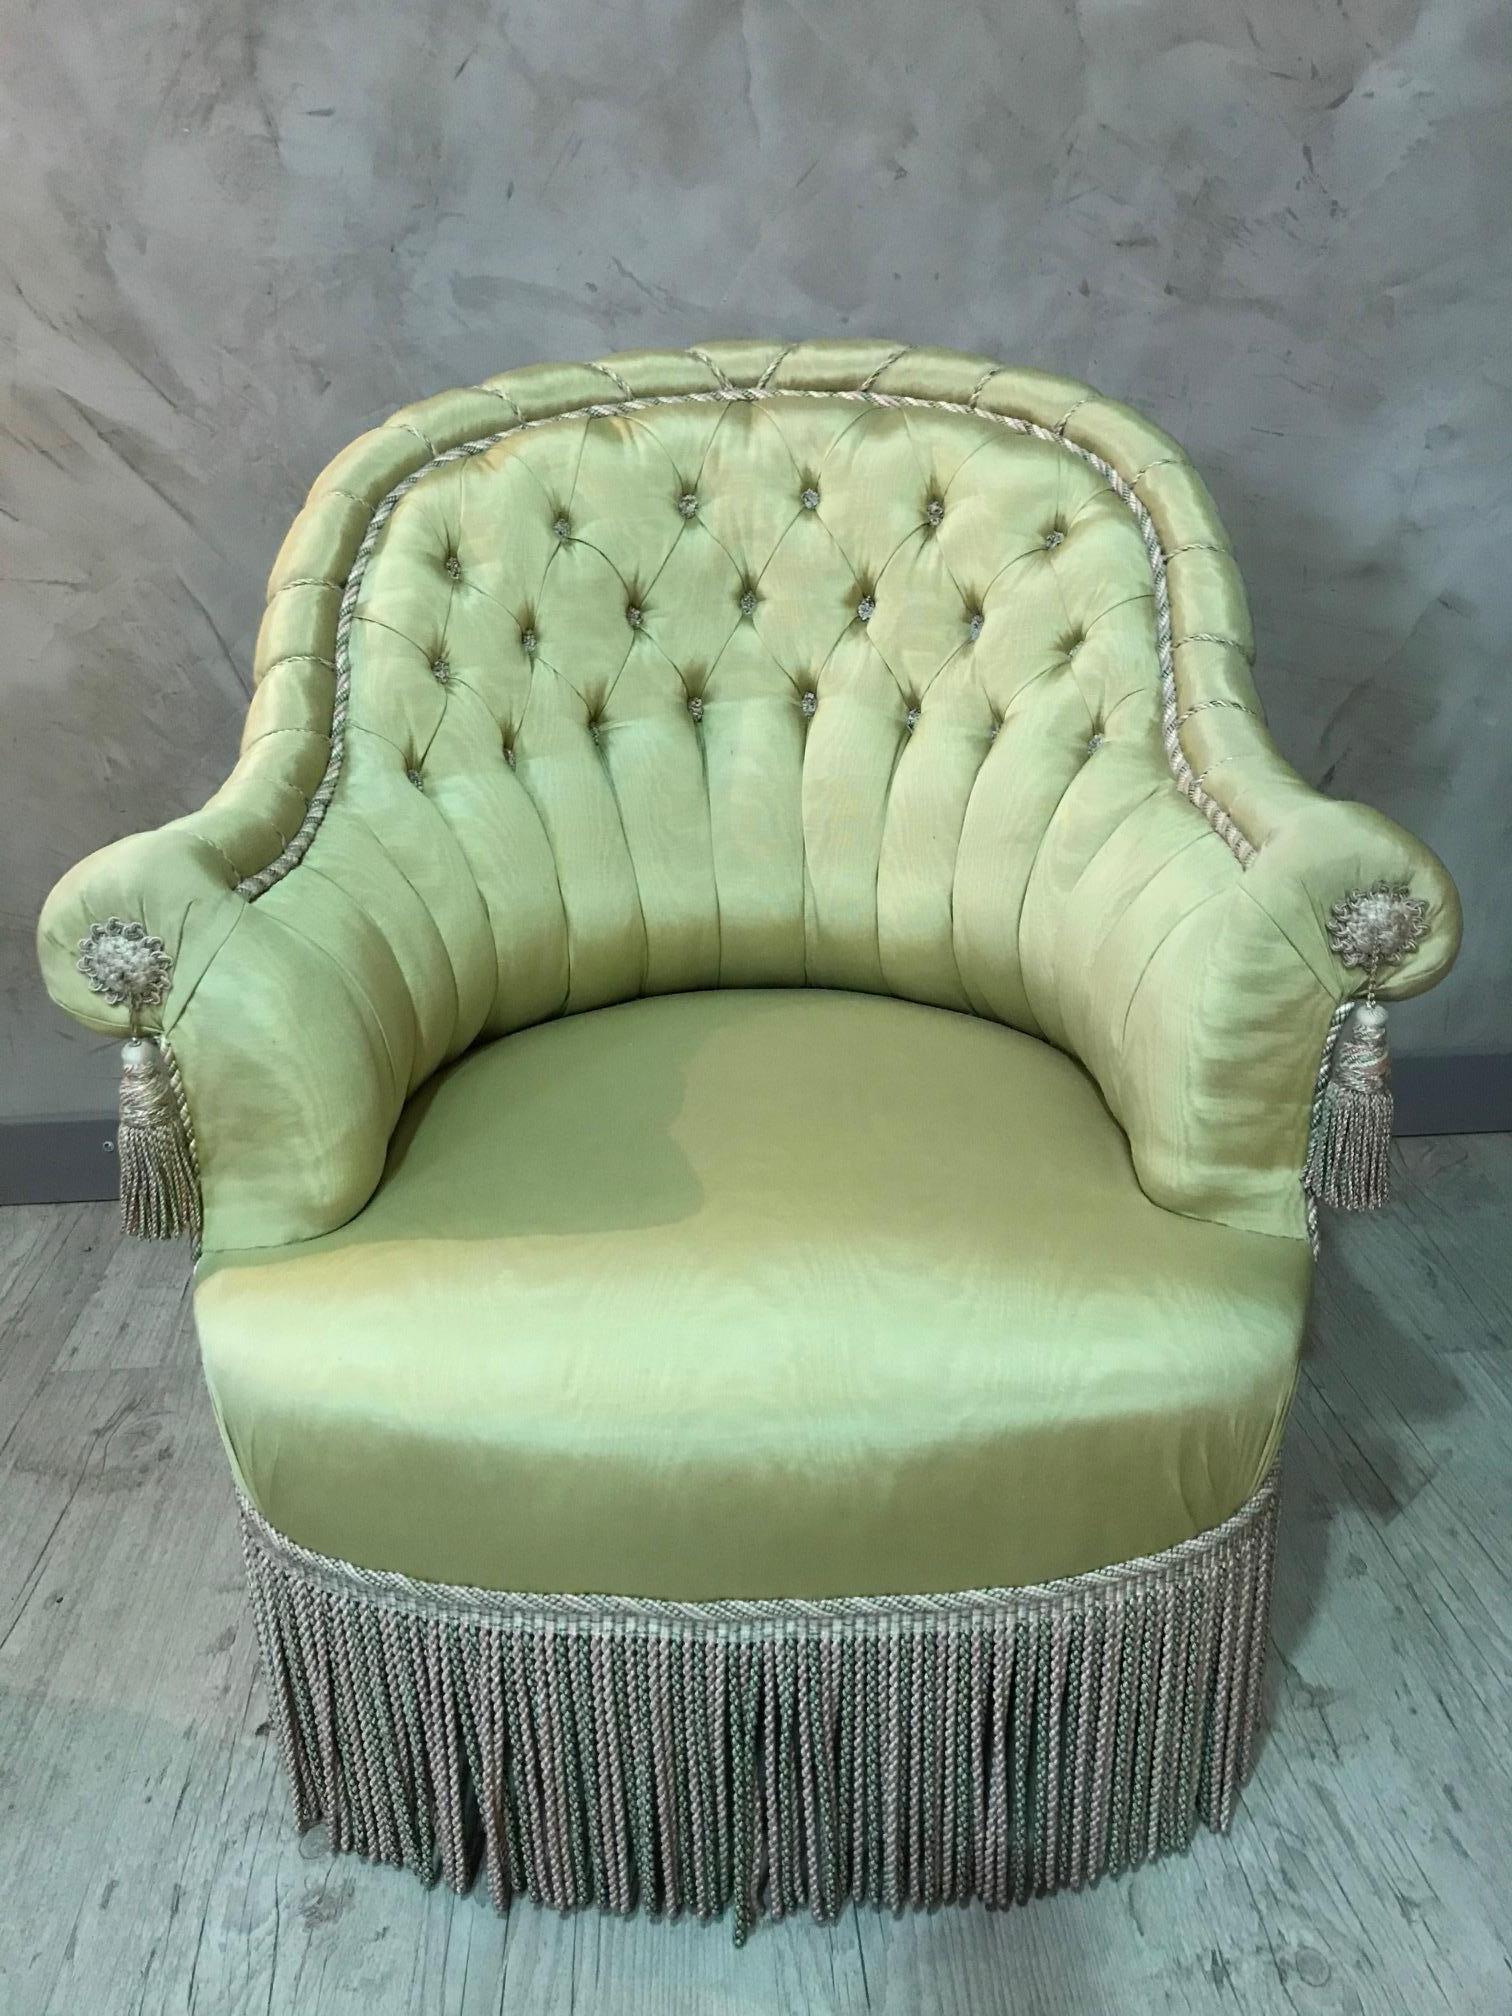 Beautiful 20th century French green Moire fabric crapaud armchair from the 1940s.
Delicate upholstered work made by a French upholsterer.
Very nice pink and green trimmings and fringe.
Dimpling on the back of the armchair (very difficult work to